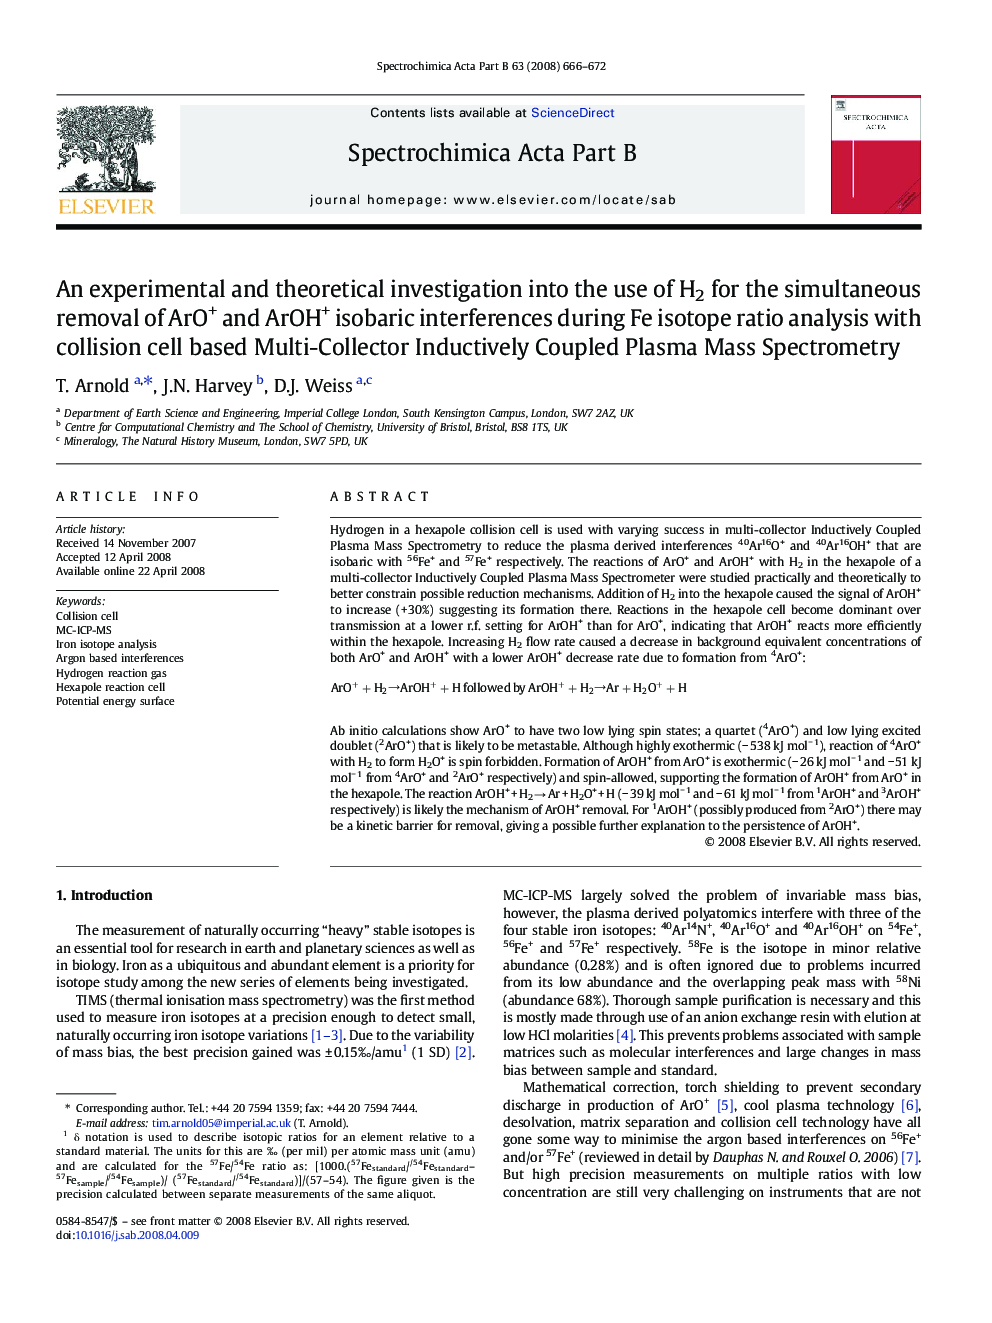 An experimental and theoretical investigation into the use of H2 for the simultaneous removal of ArO+ and ArOH+ isobaric interferences during Fe isotope ratio analysis with collision cell based Multi-Collector Inductively Coupled Plasma Mass Spectrometry